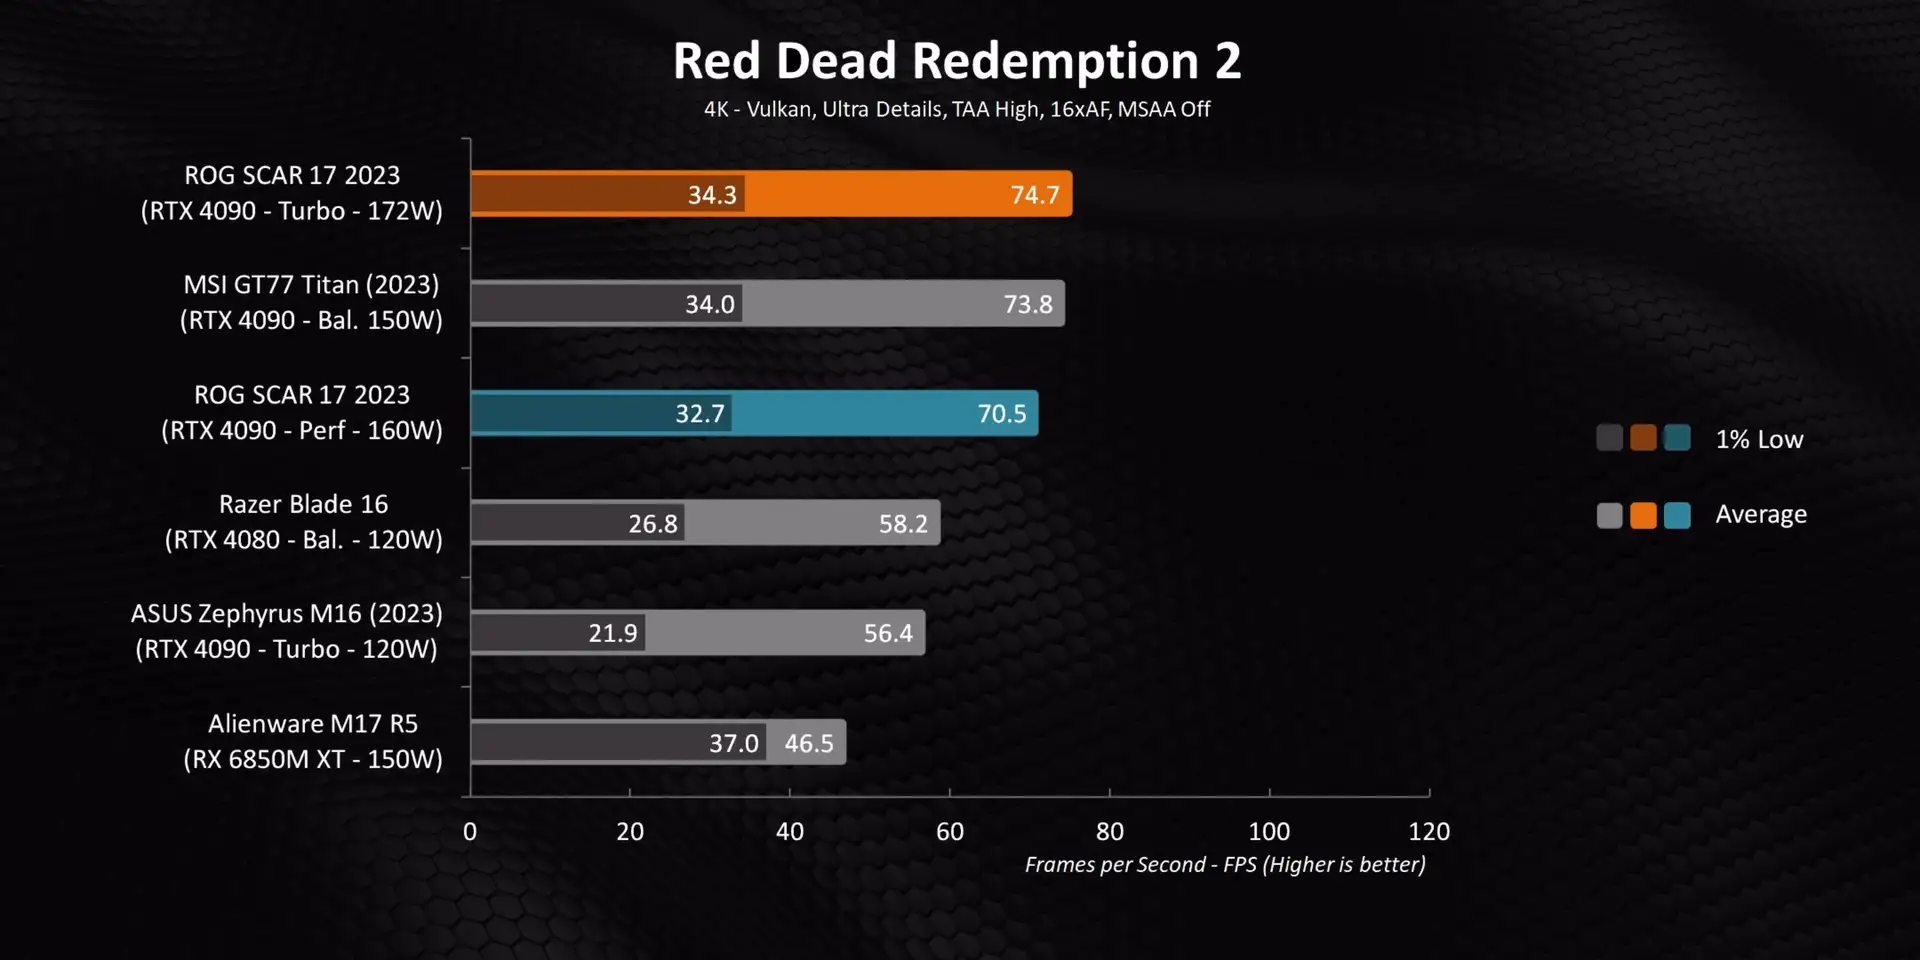 Red Dead Redemption 2 Gaming Performance